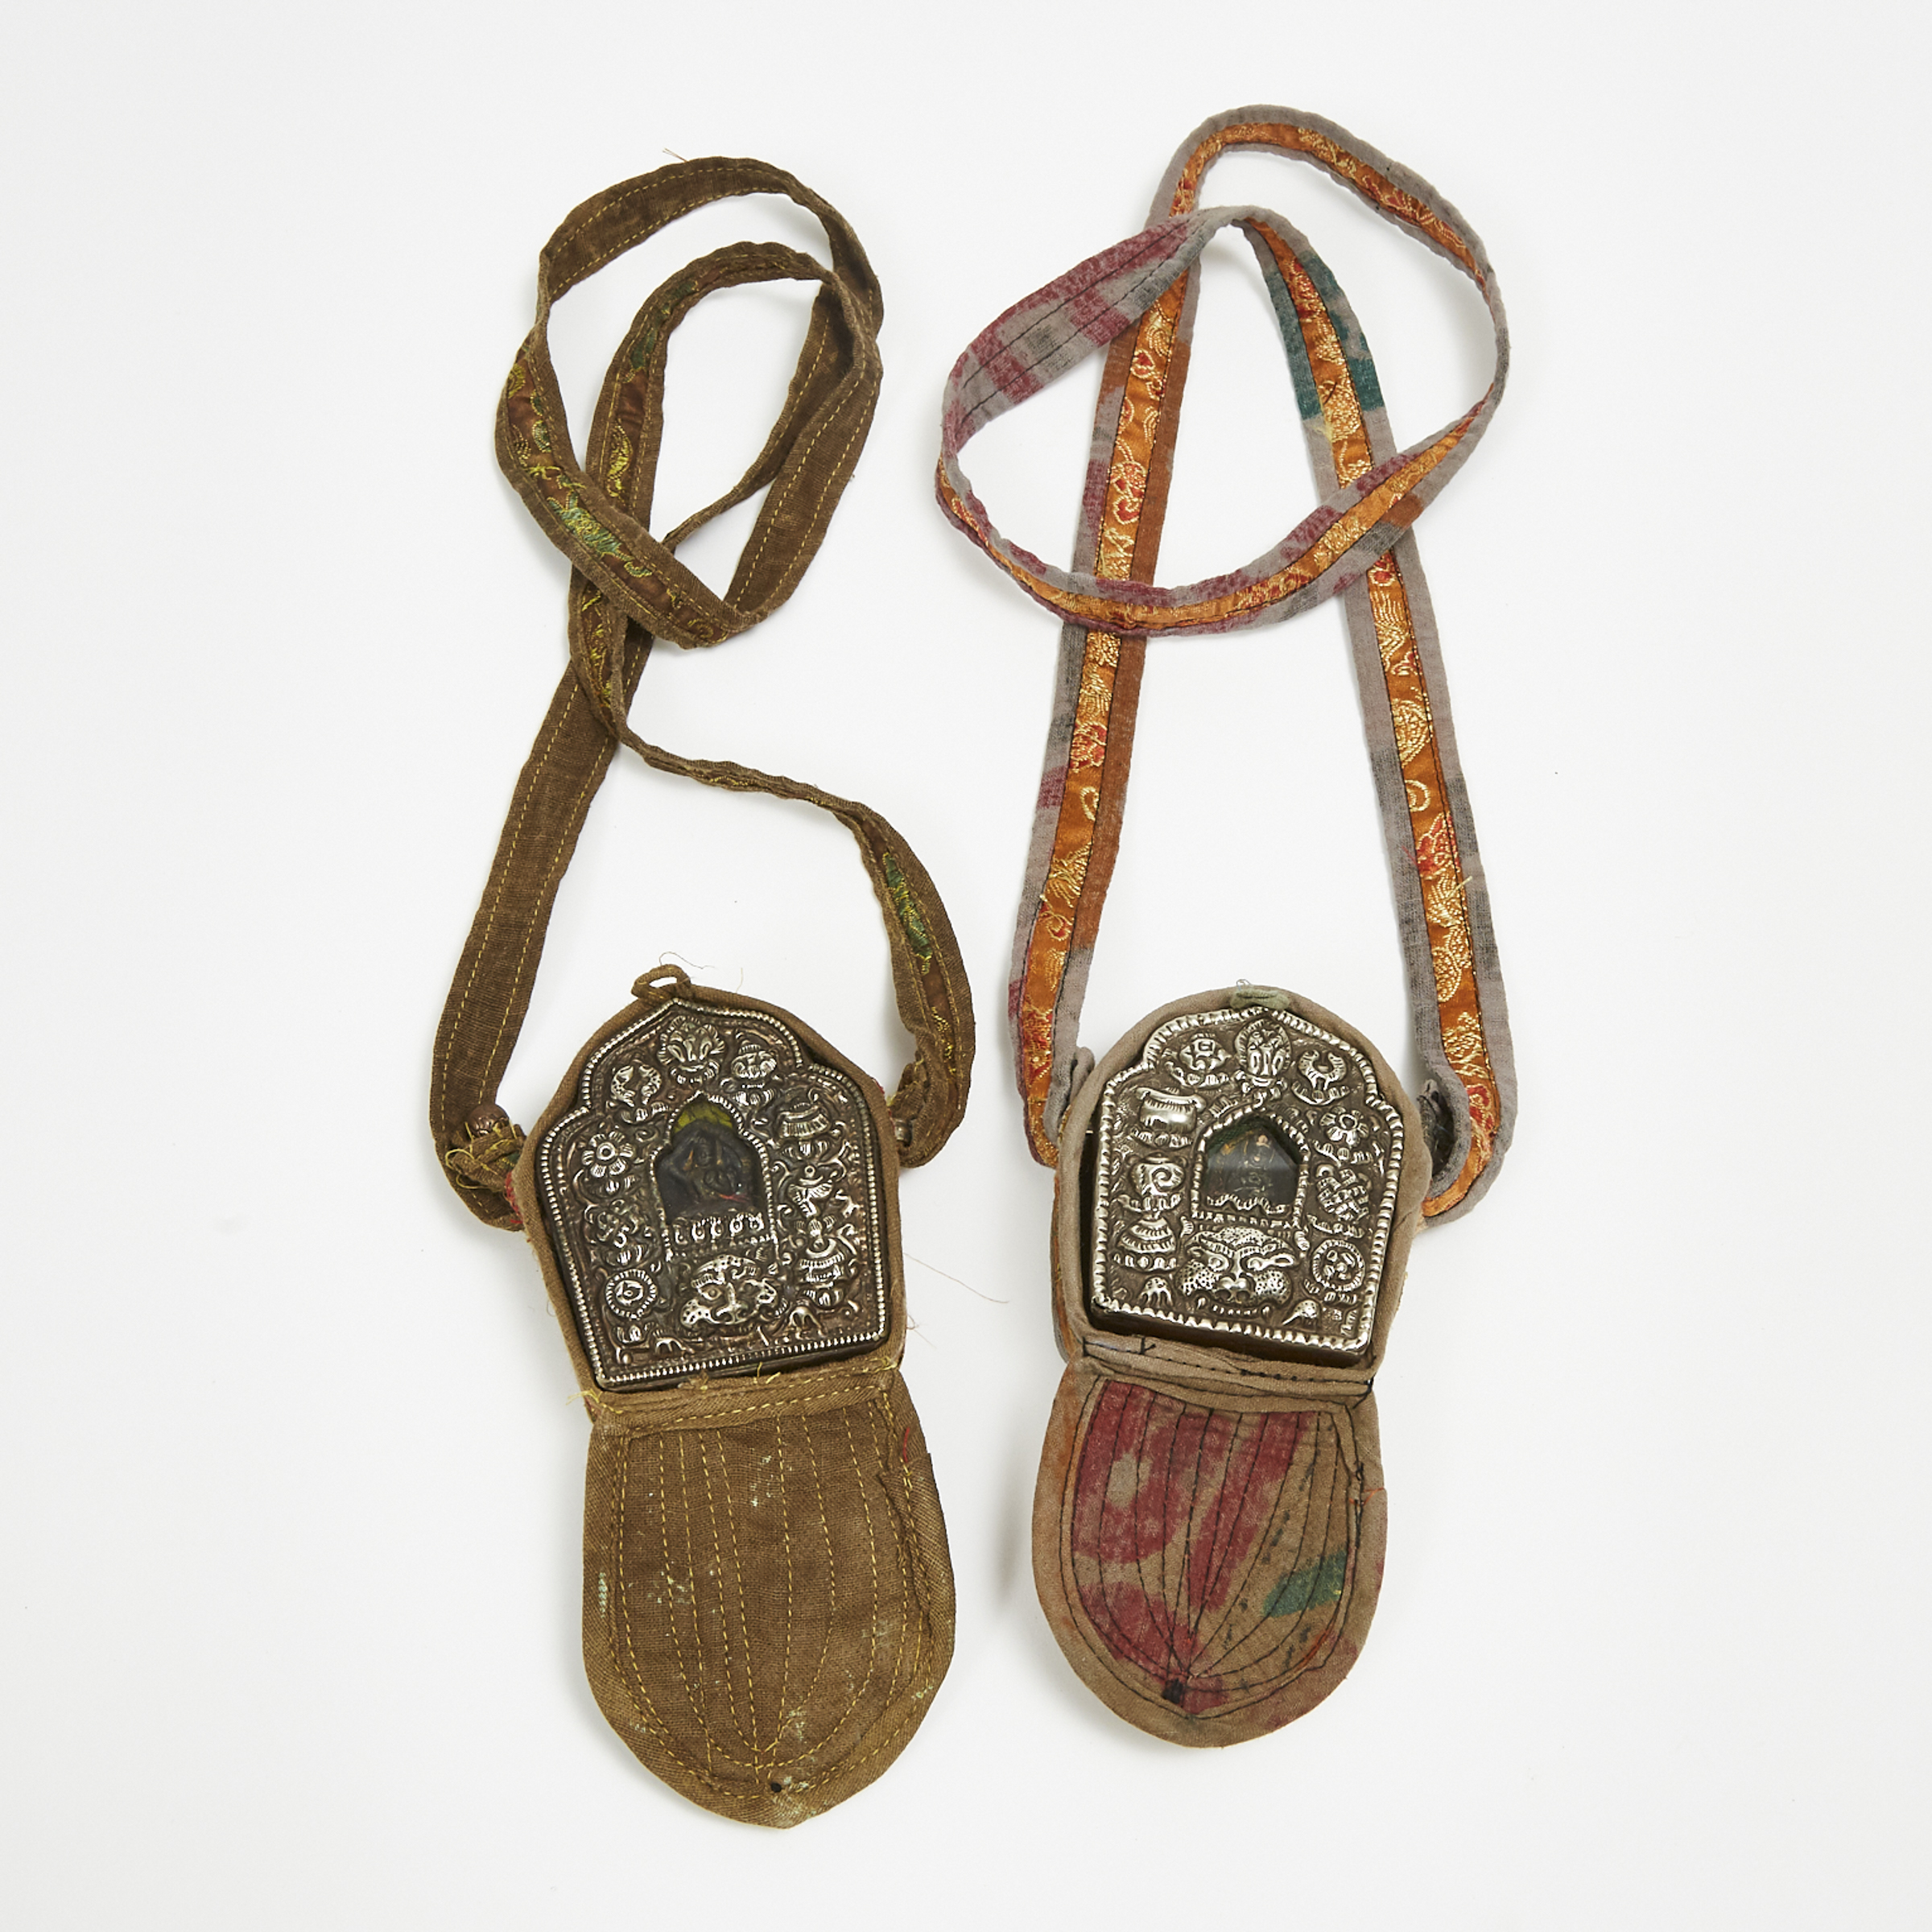 Two Tibetan Silver Traveling Shrines Encased in Textile Covers, Qing Dynasty